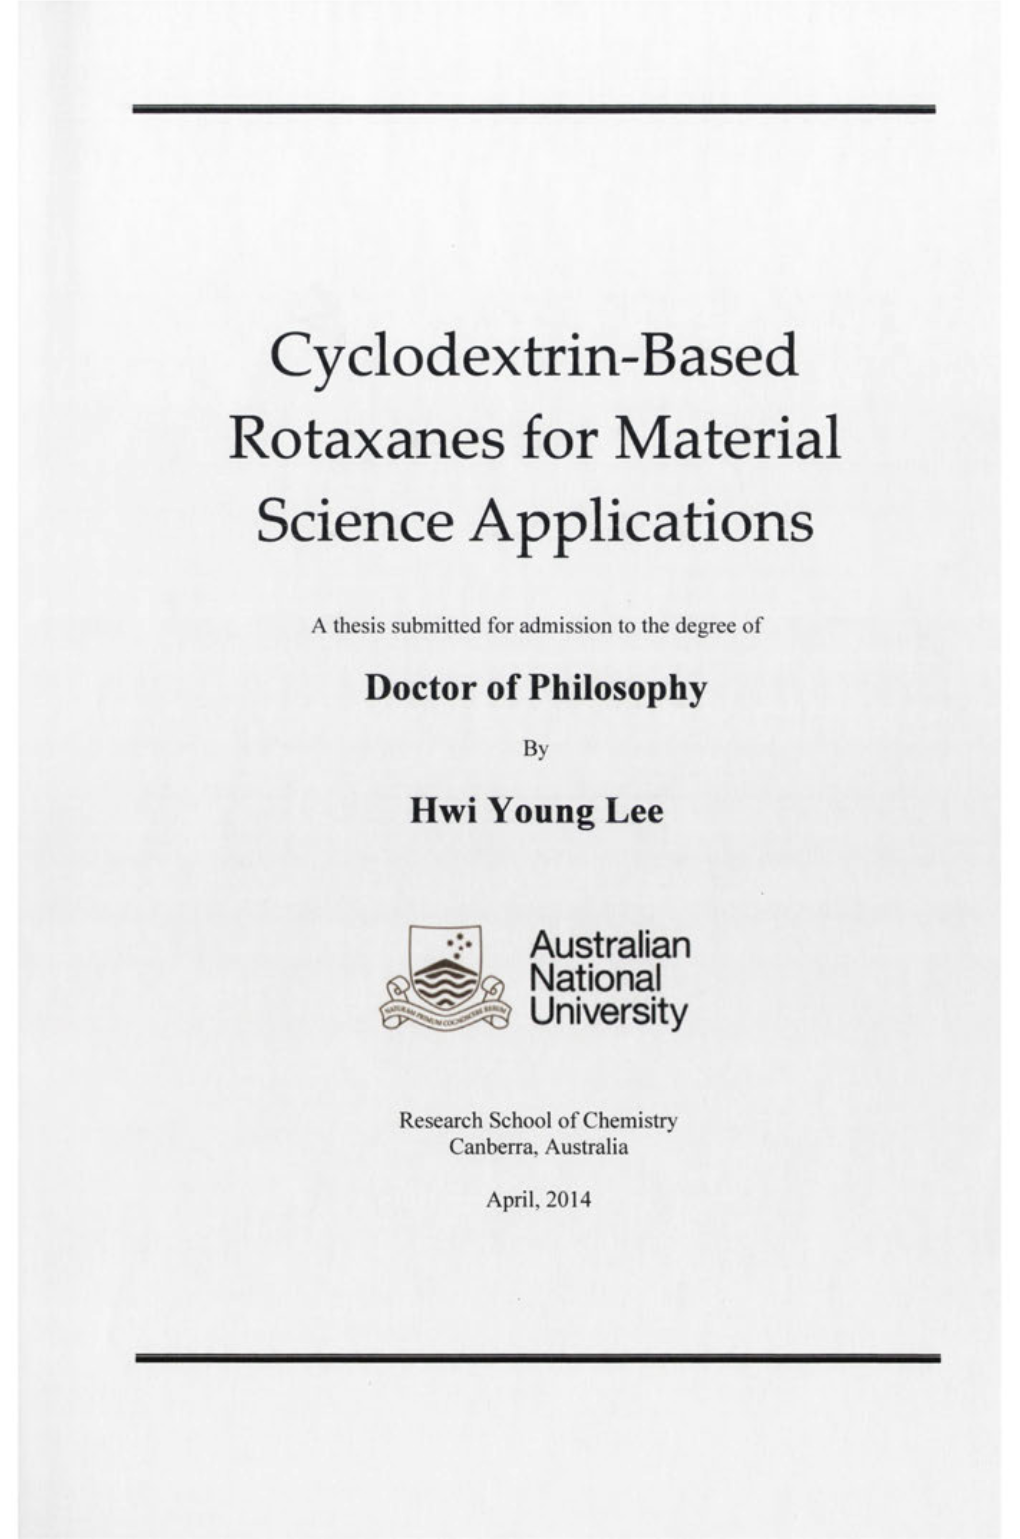 Cyclodextrin-Based Rotaxanes for Material Science Applications